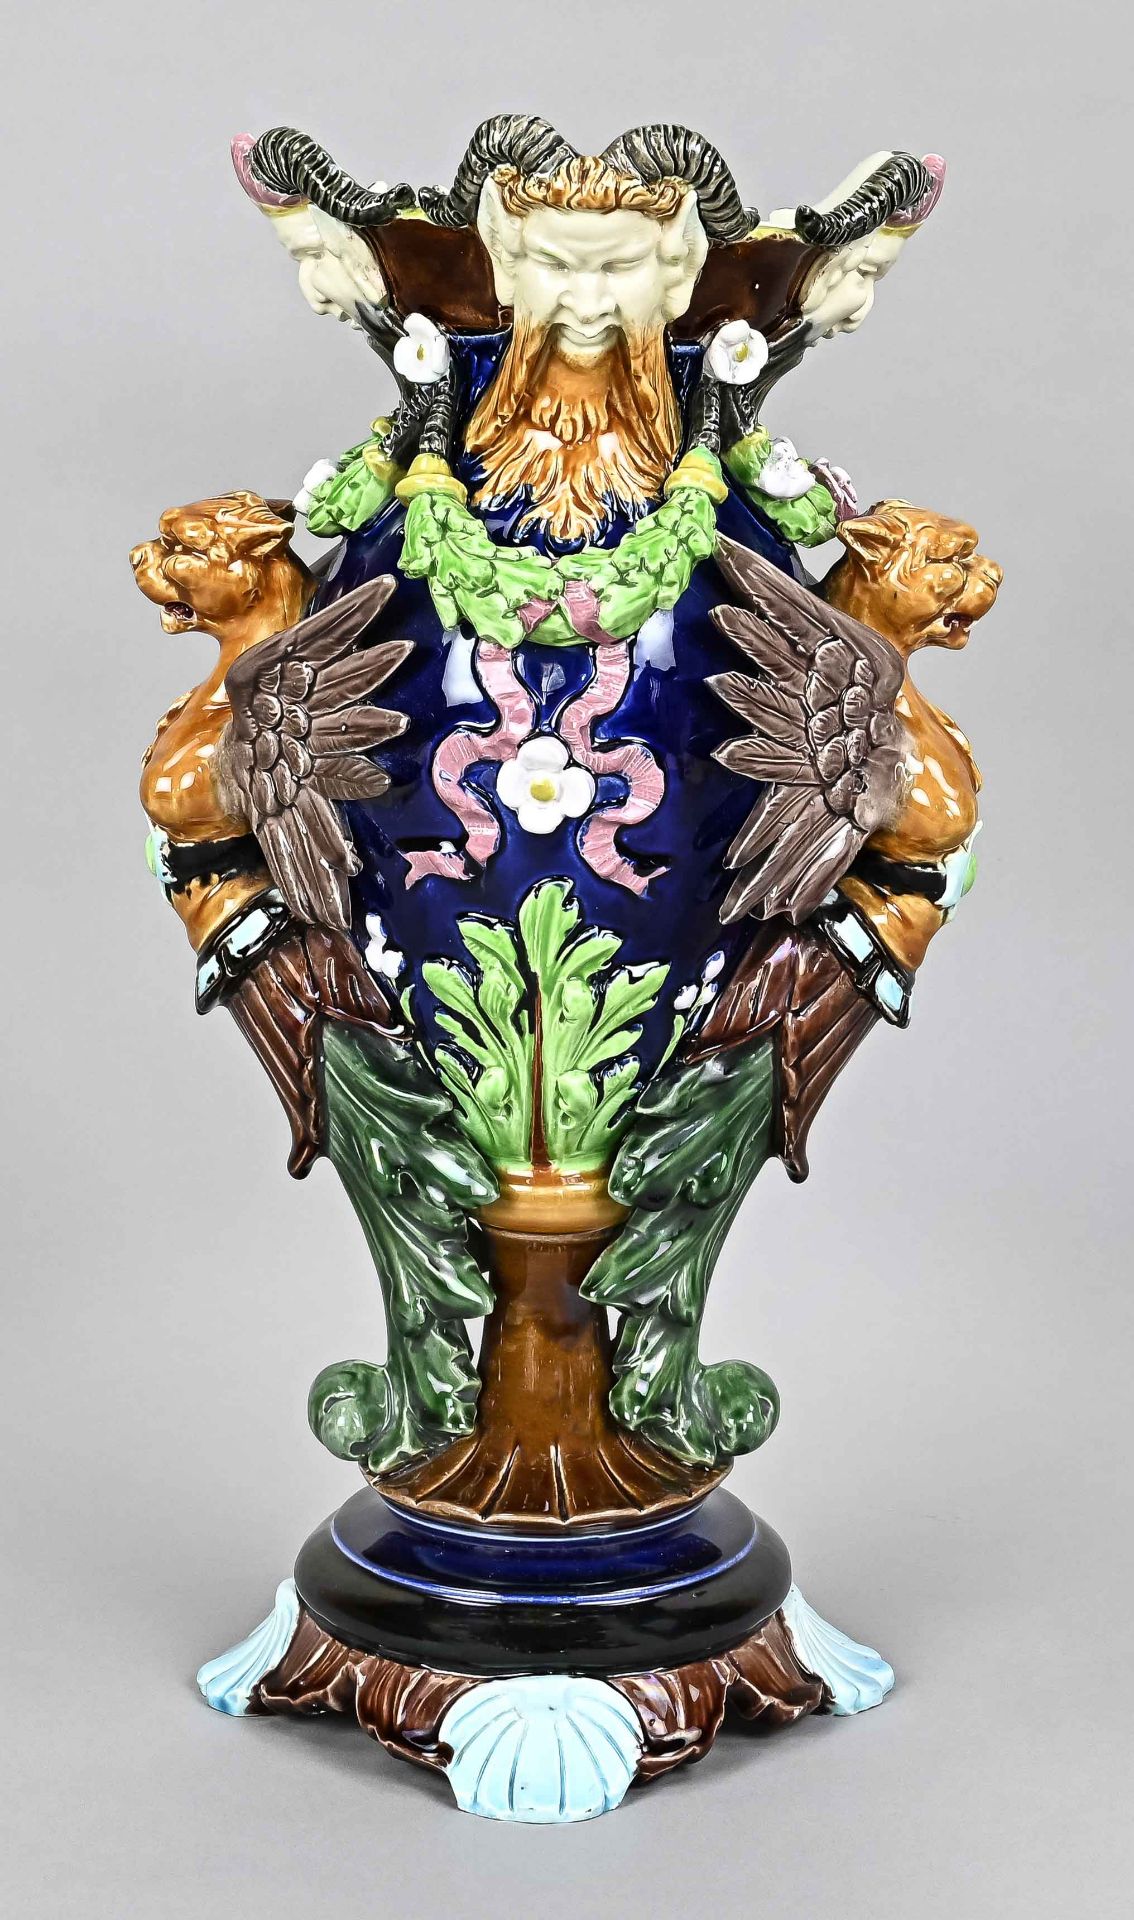 Large magnificent majolica vase, Italy, 19th century, on the bottom a press mark, press no. 1520, m - Image 4 of 5